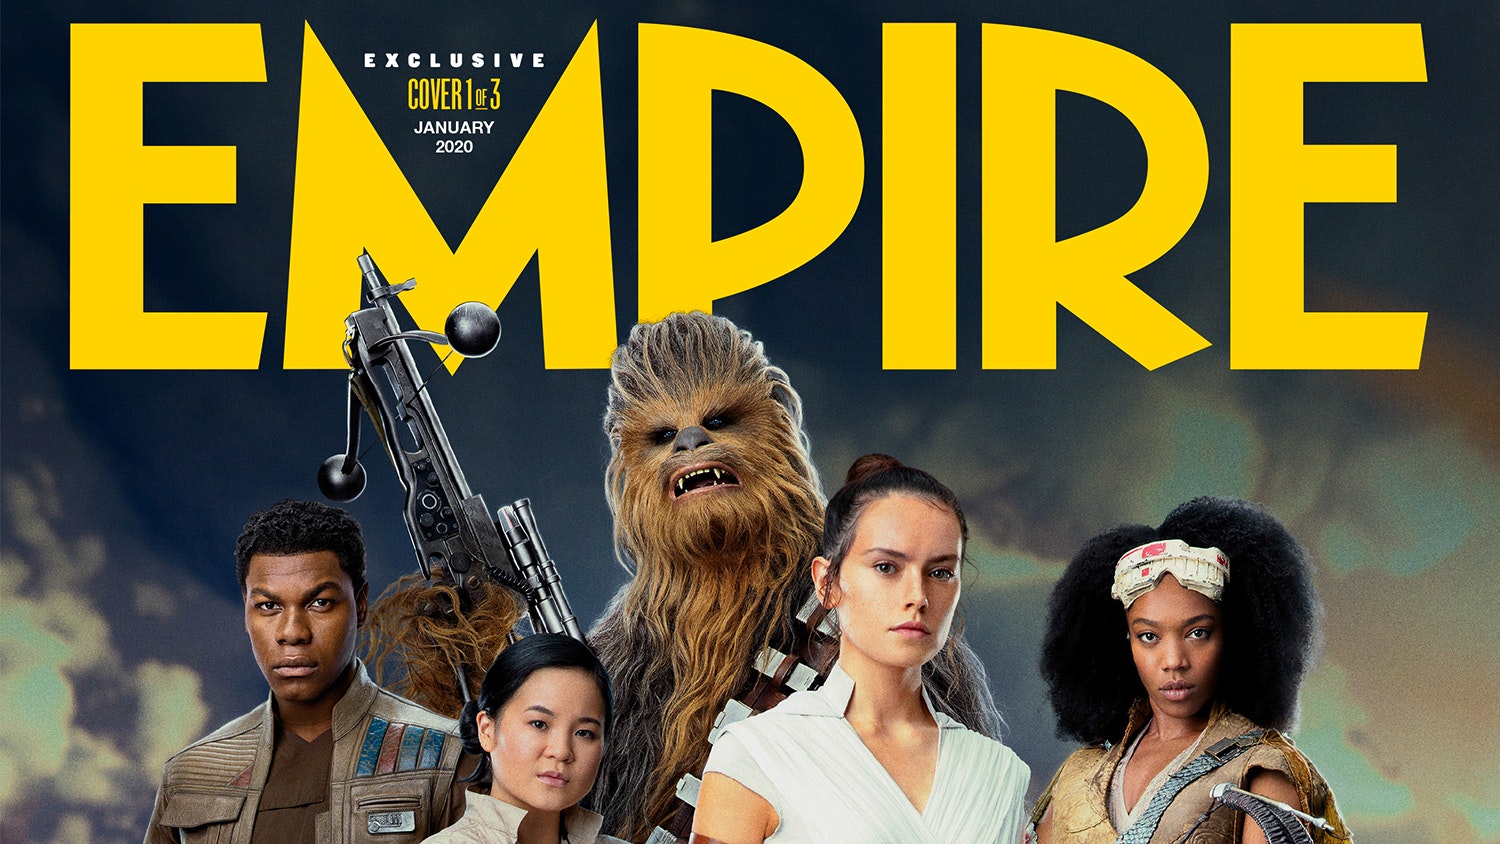 Empire's Star Wars: The Rise Of Skywalker Collectors' Edition Covers  Revealed, Movies